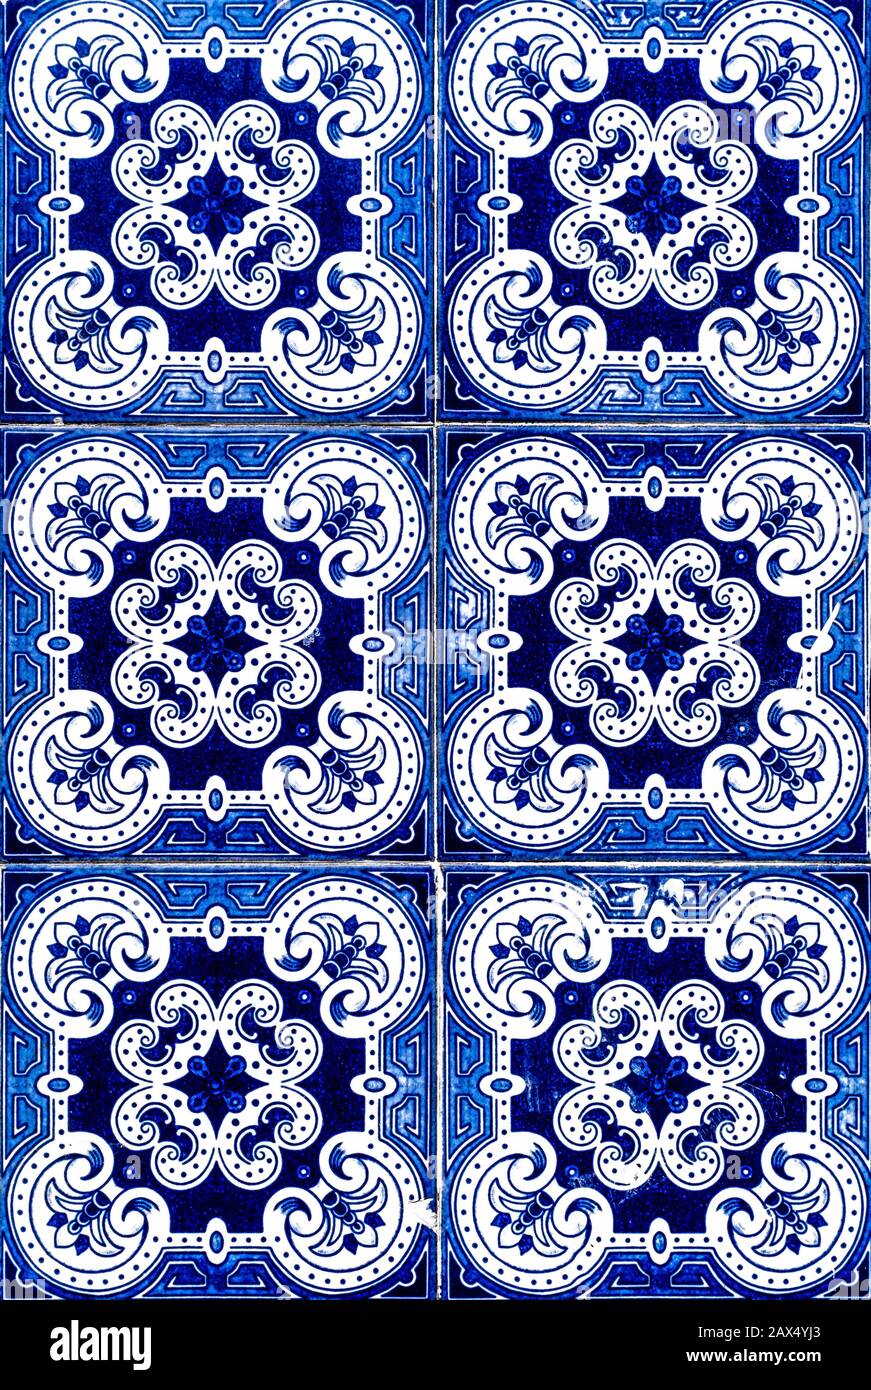 Portuguese traditional tiles Azulejos with blue floral pattern on a white background. Stock Photo